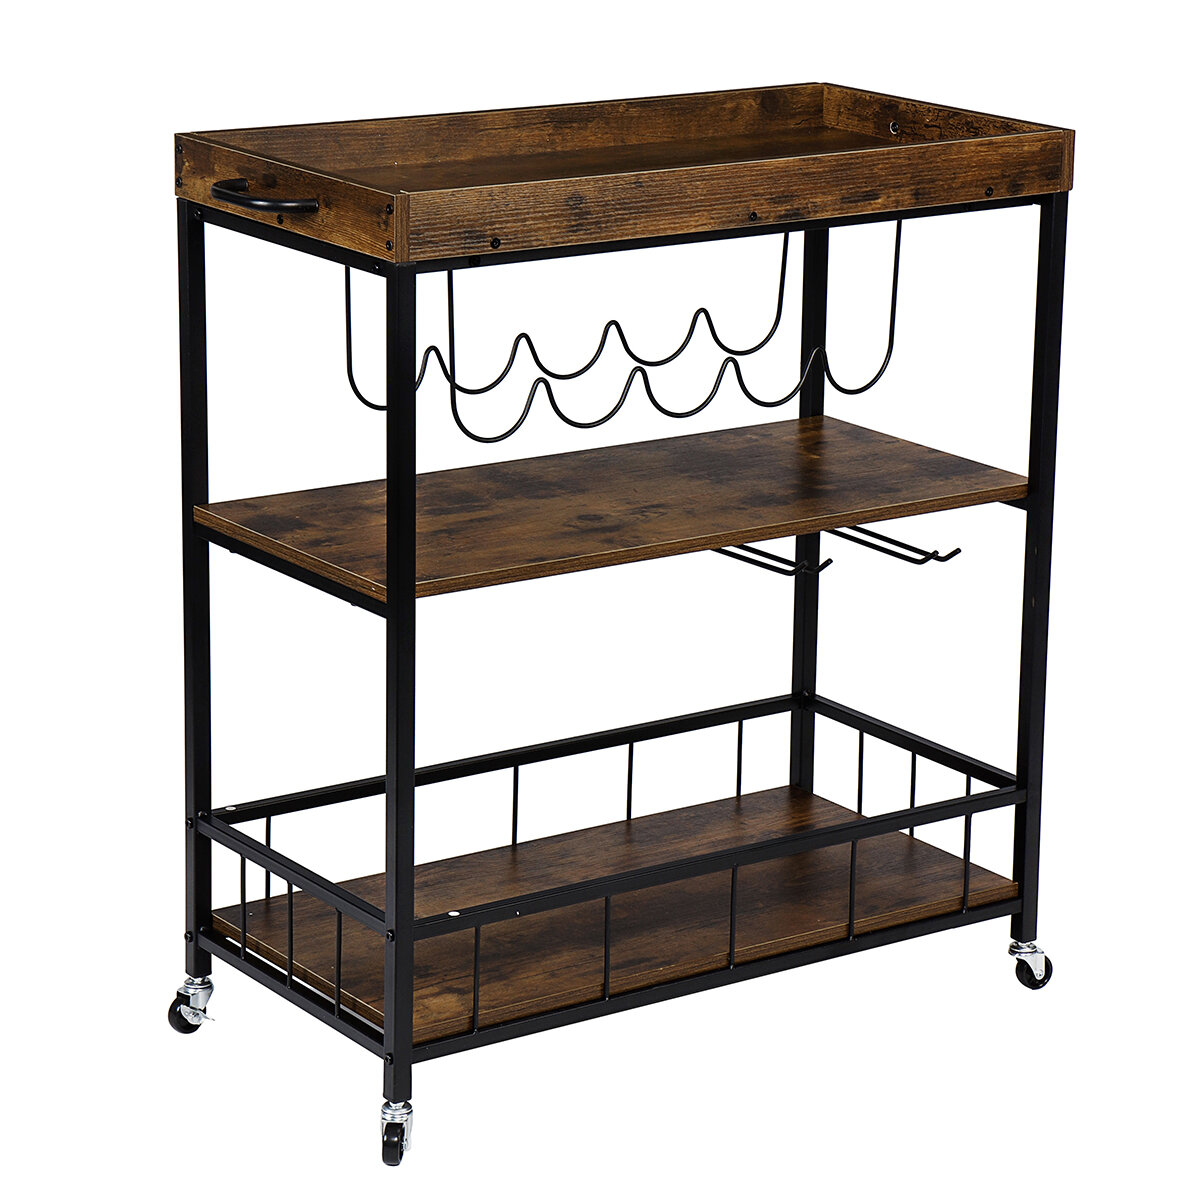 Image of Snailhome Bar Wine Rack Cart Kitchen Food Truck Serving Buffet Sideboard Multi Function Three-tier Cart Holder